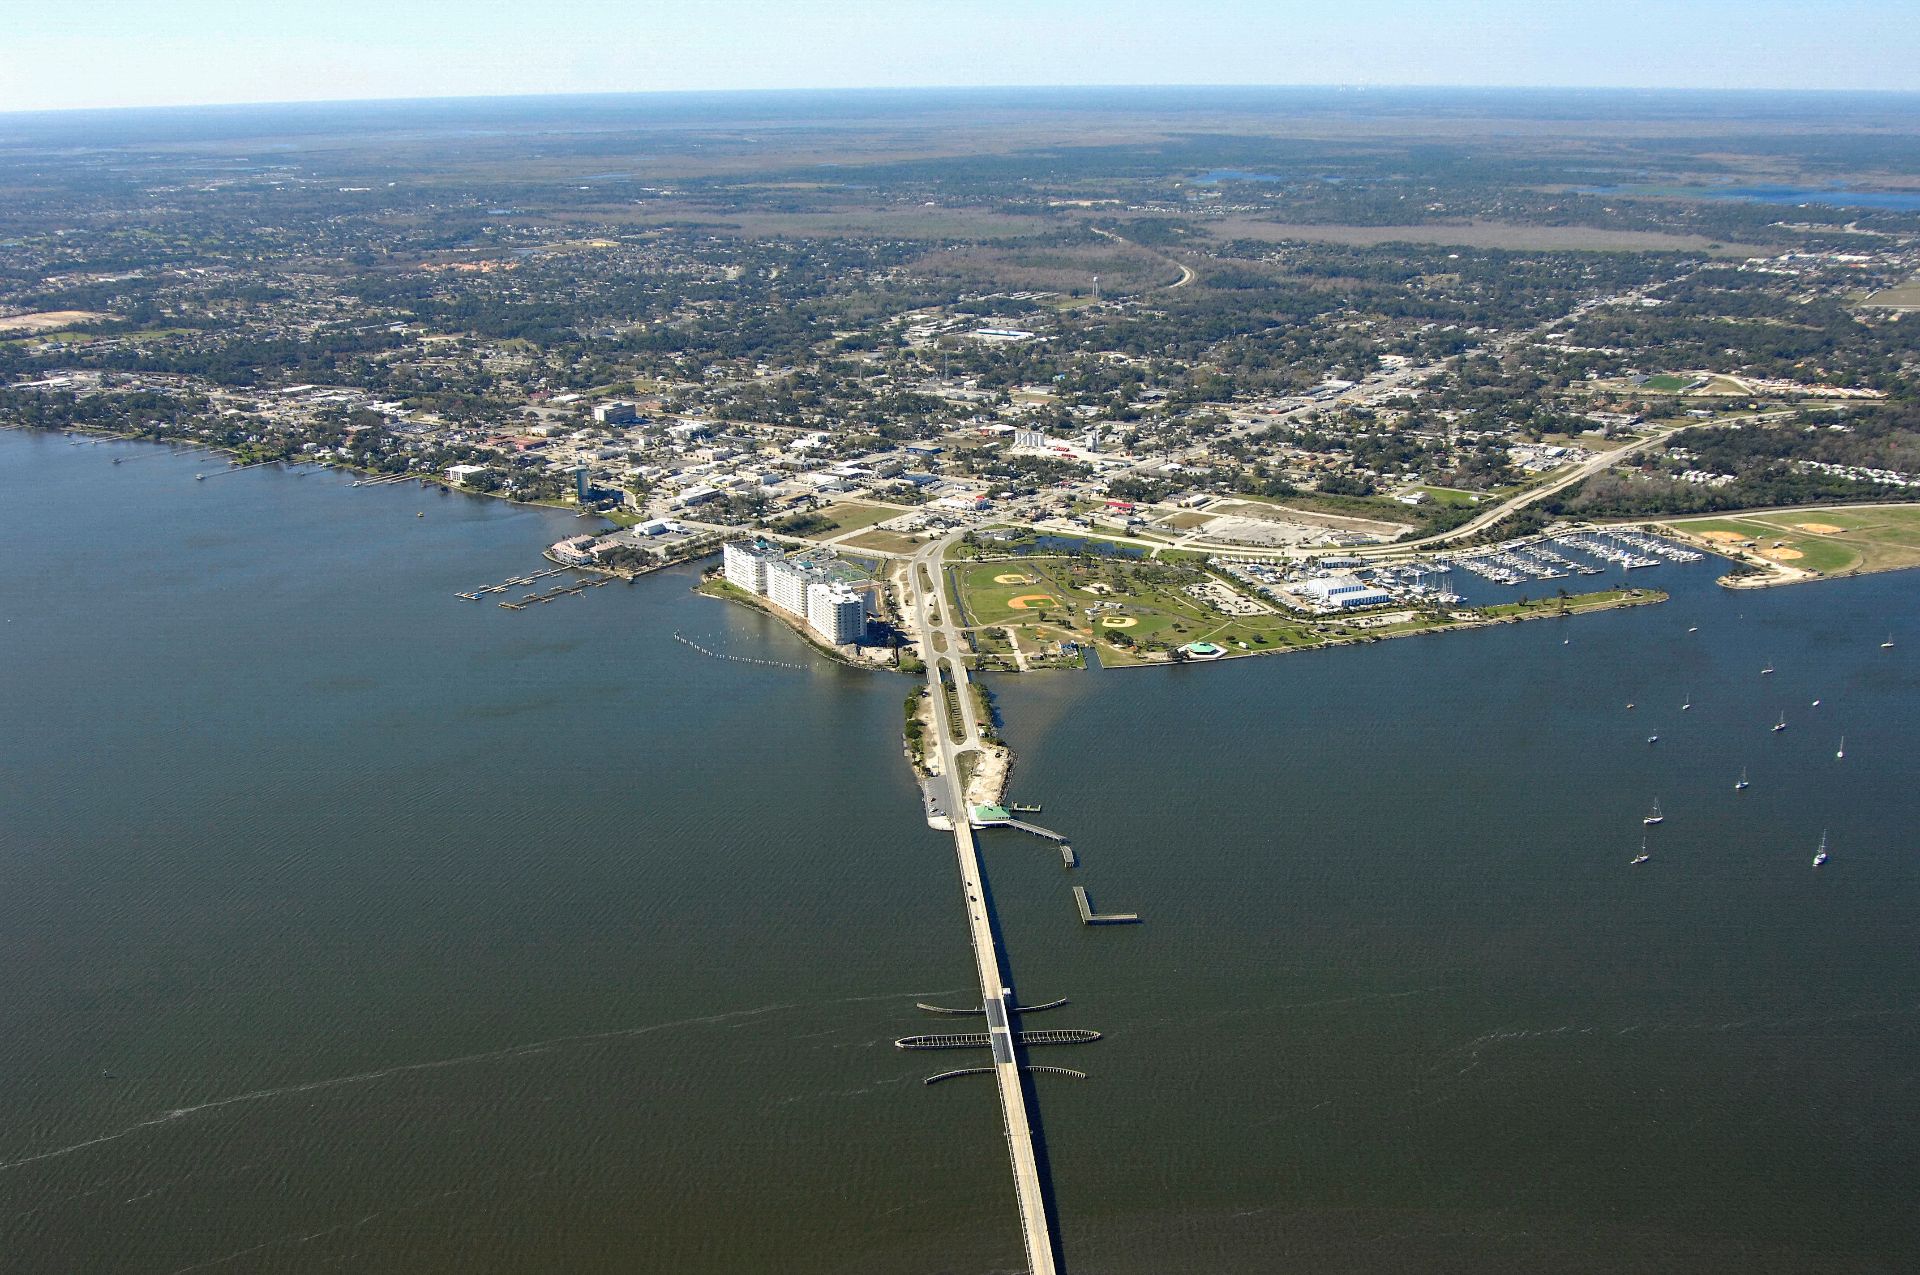 An aerial view of a bridge over a body of water.